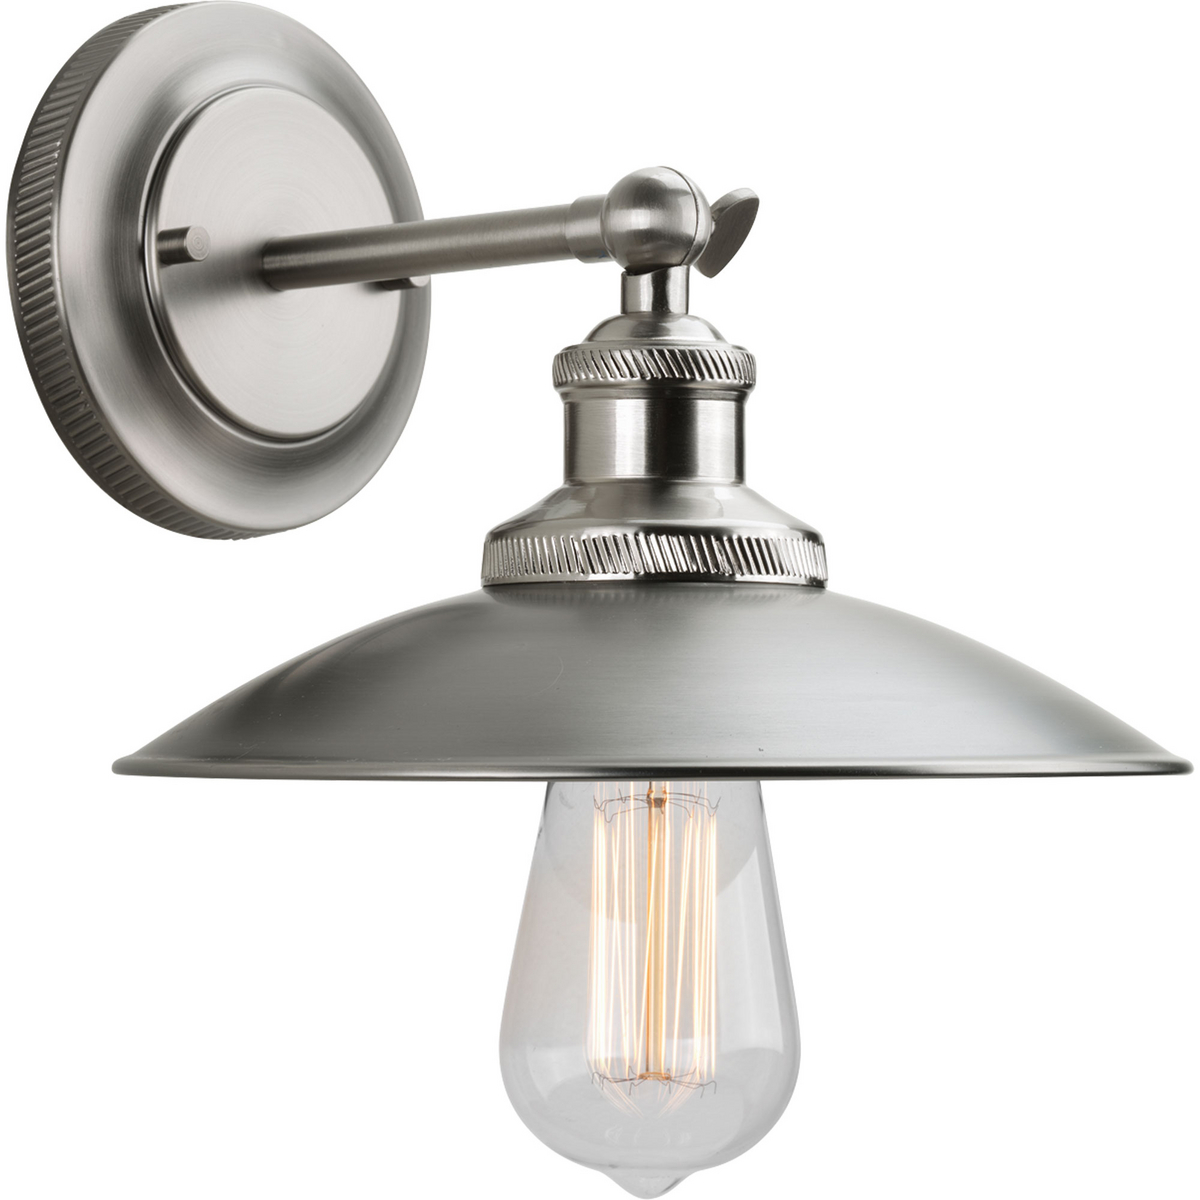 With Archives' pendants and wall sconce, carefully crafted details and special accents achieve a vintage electric feel. One-light adjustable swivel wall sconce with brushed nickel accents.